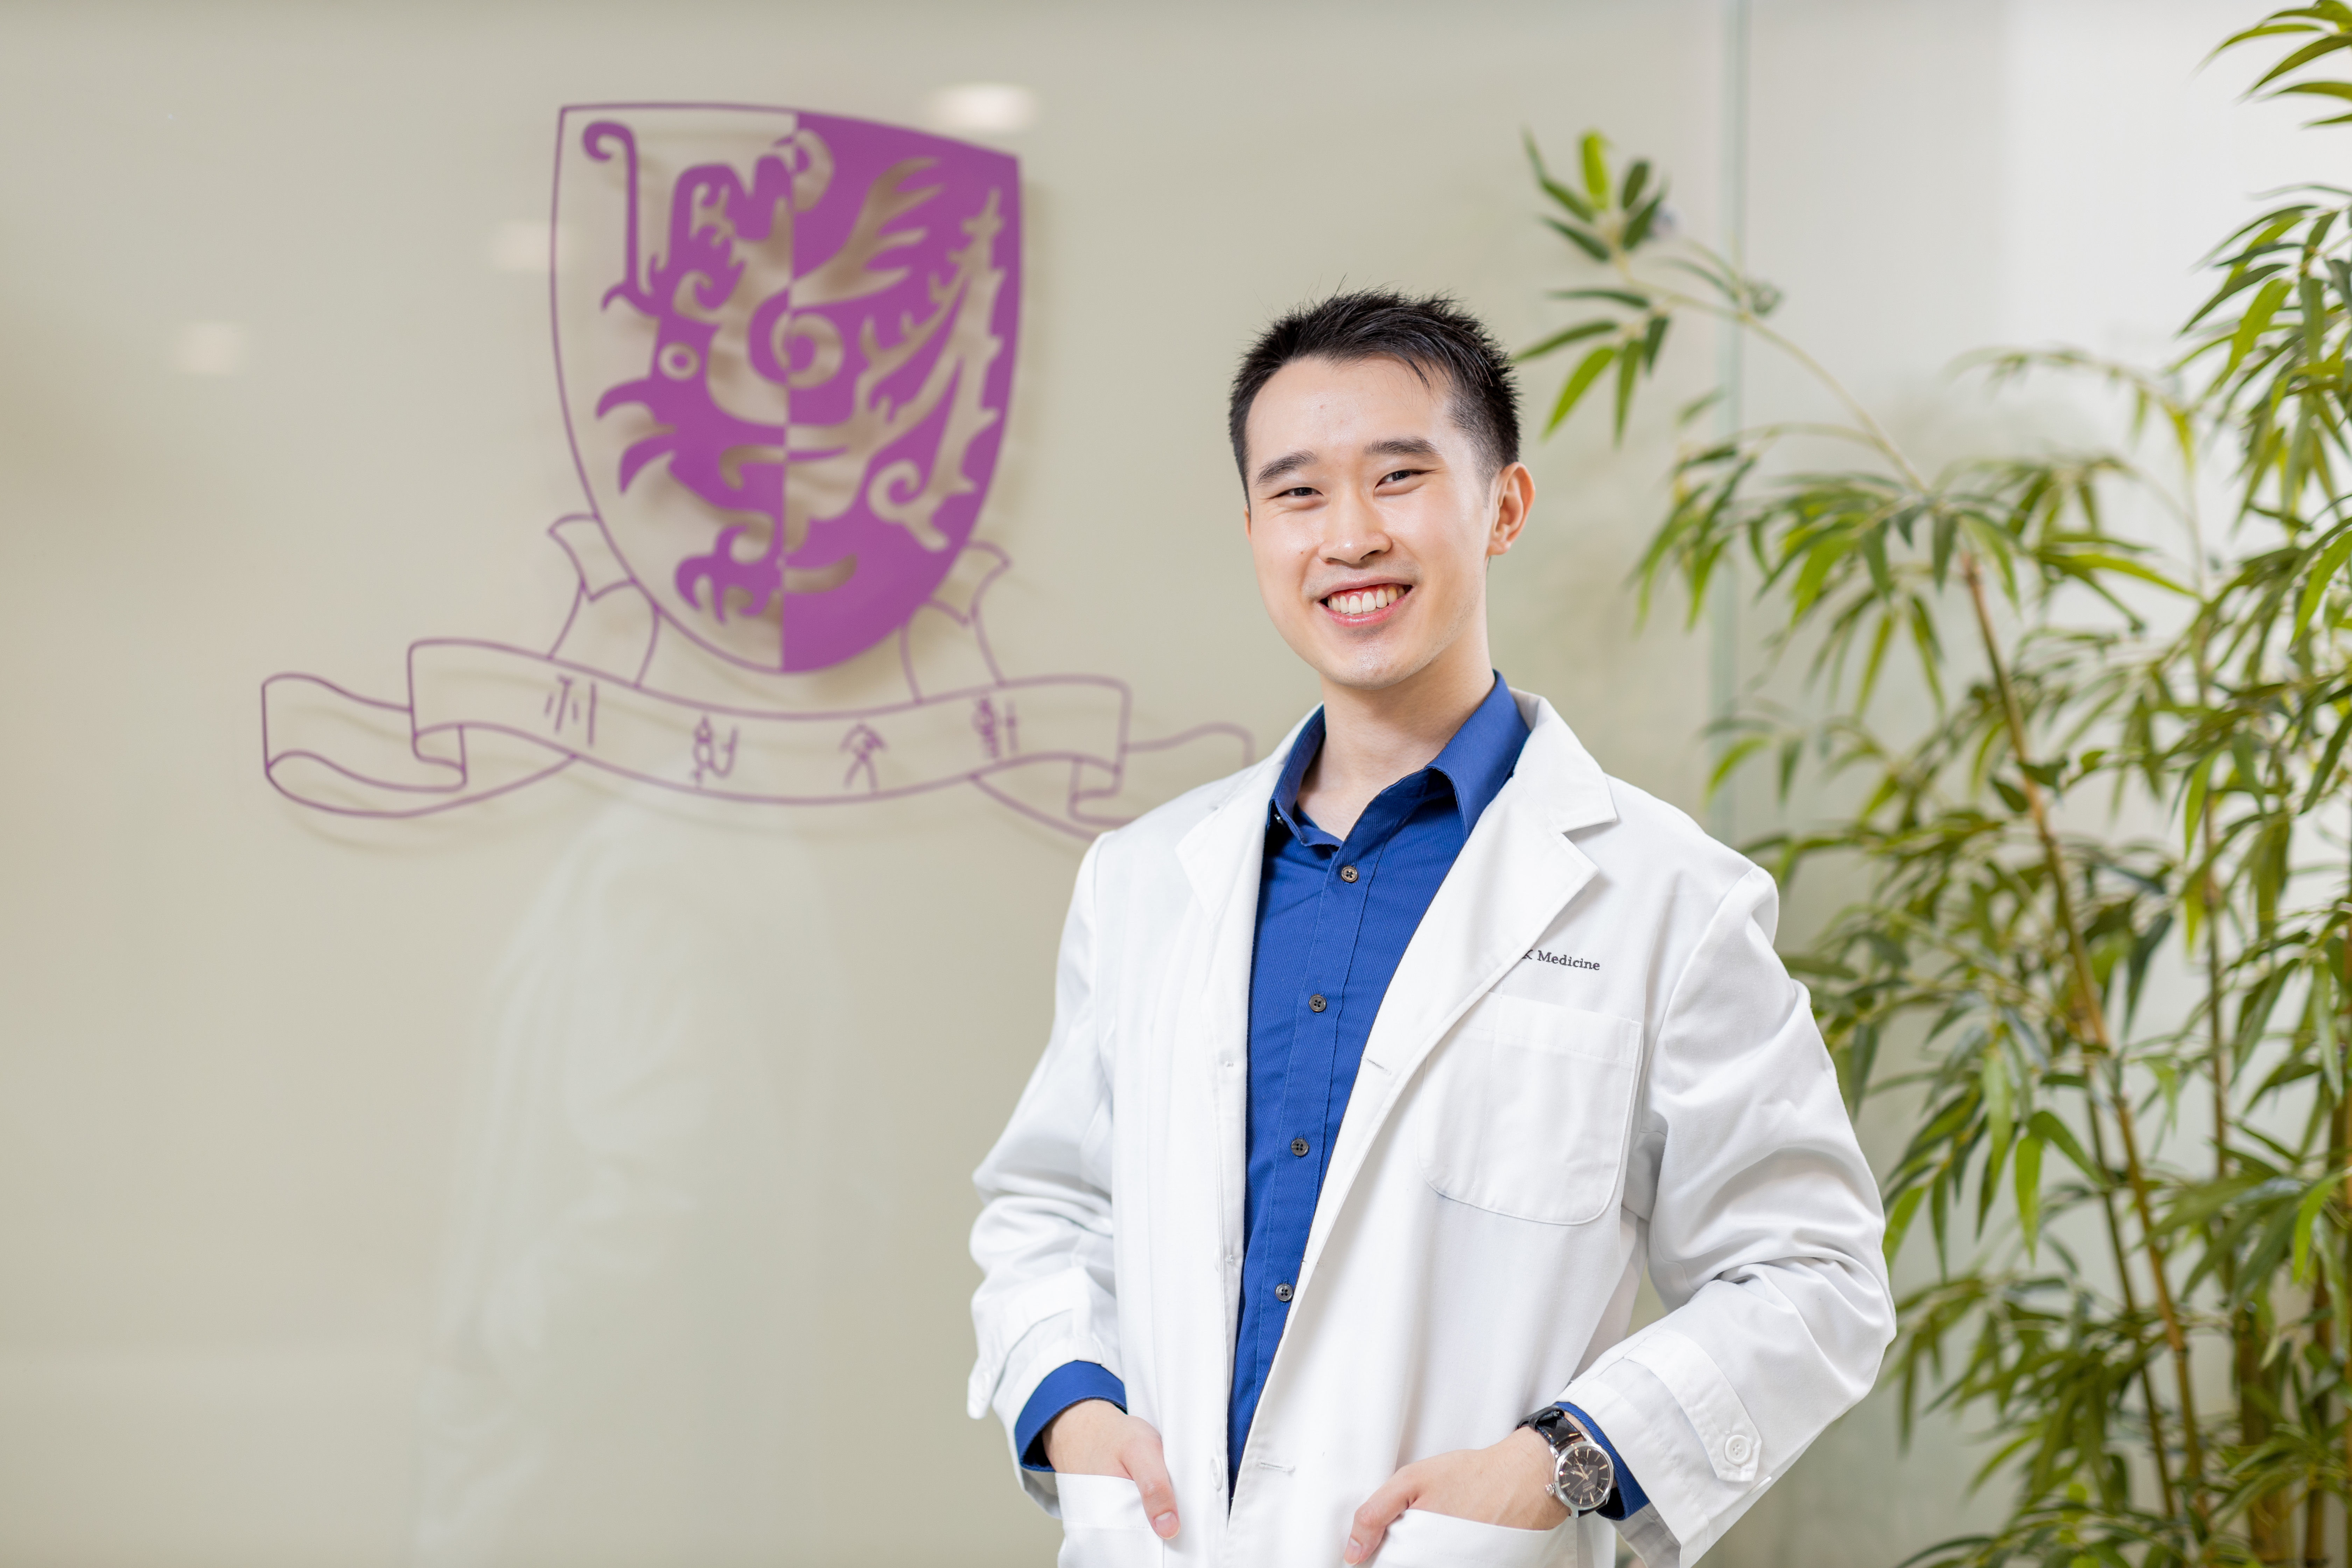 Allan Lui was awarded a Cambridge Croucher International Scholarship to study at the University of Cambridge.